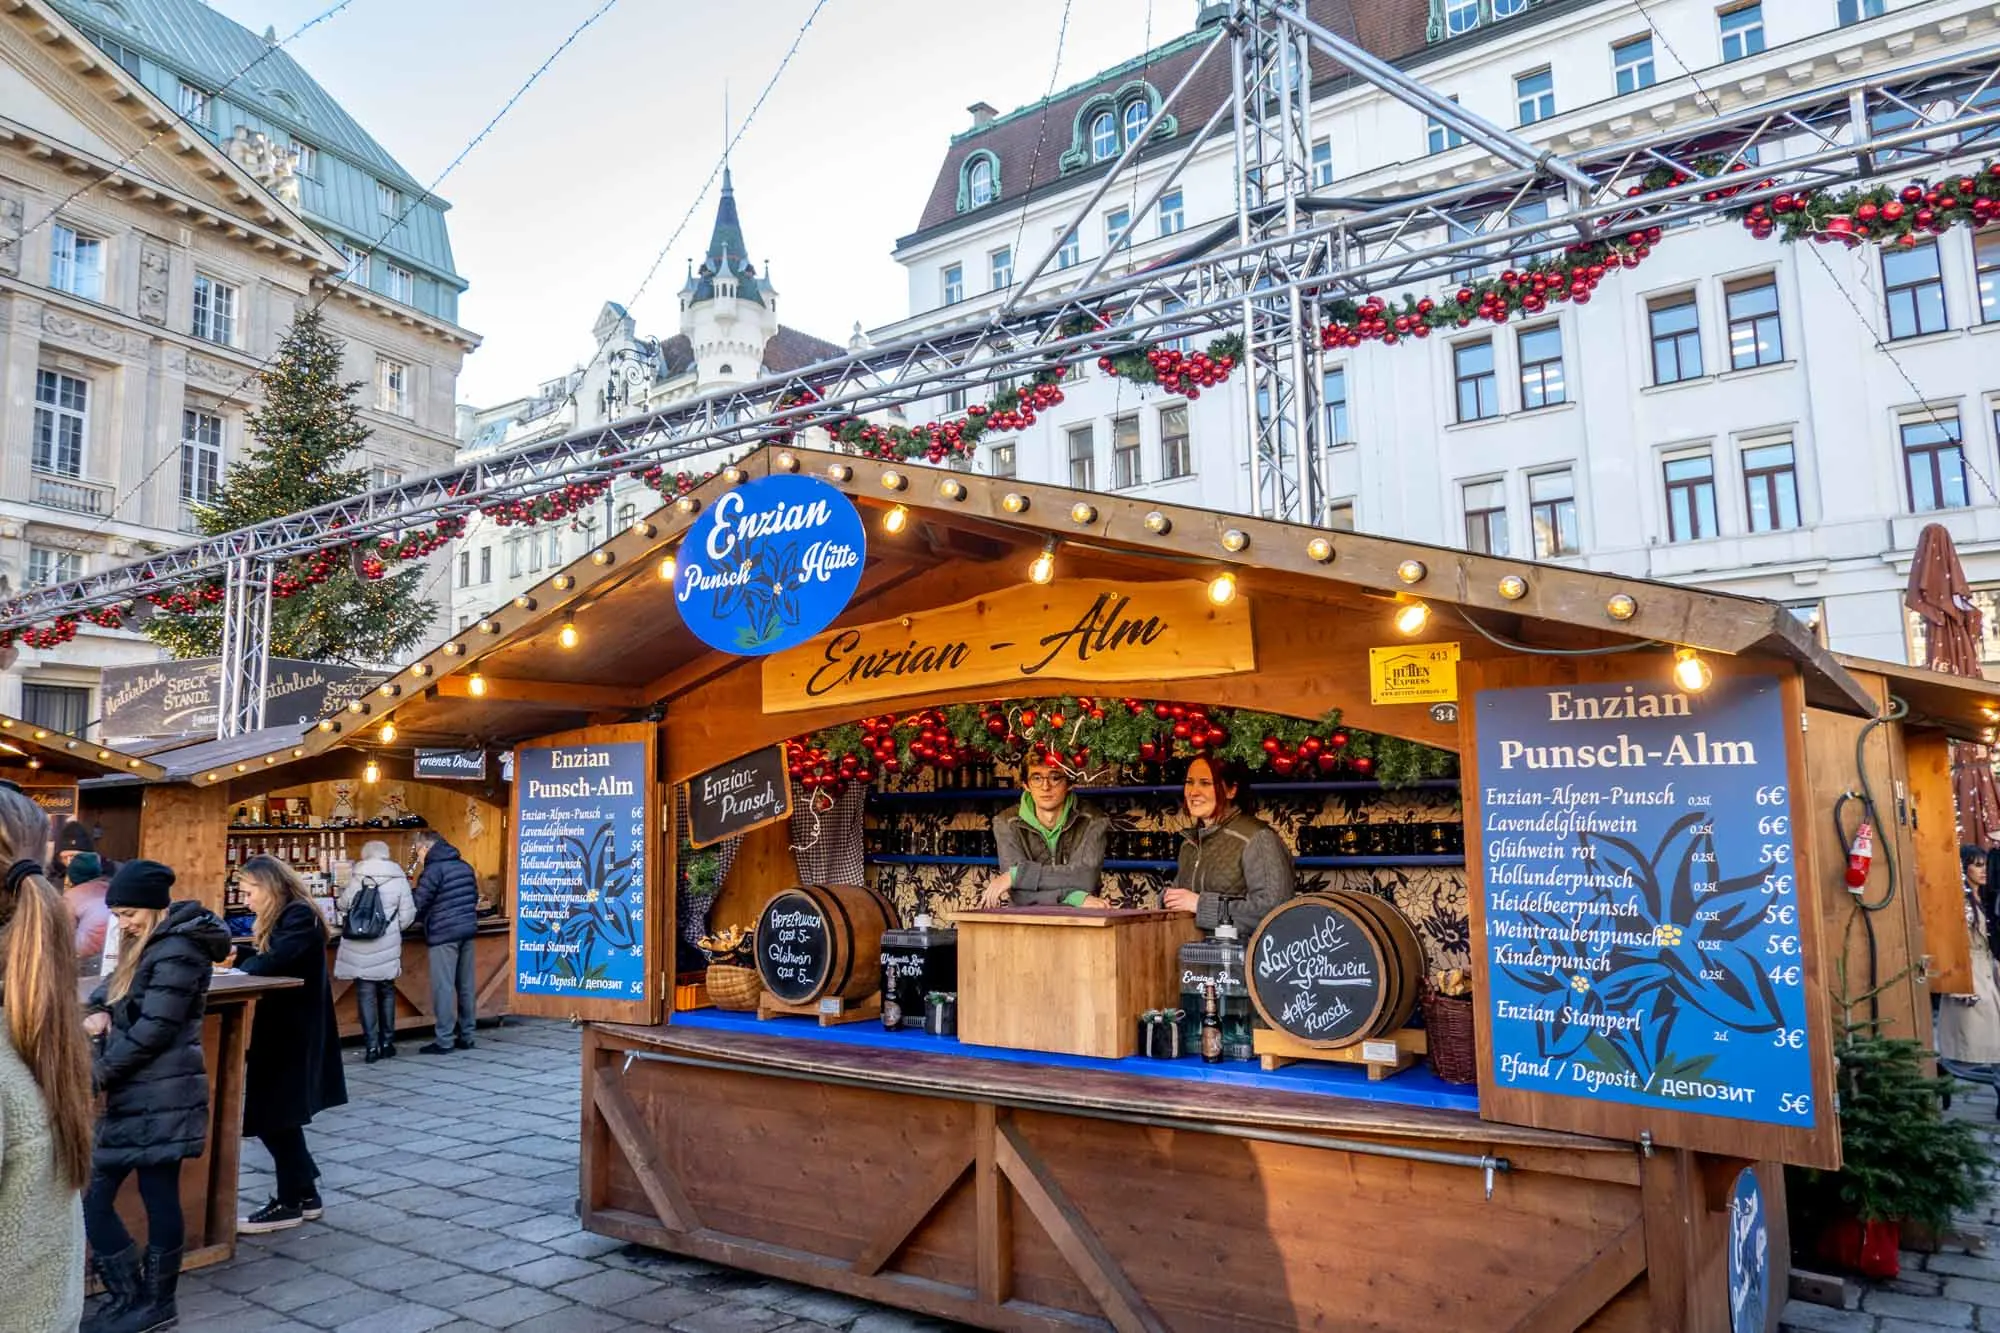 Wooden kiosk selling drinks at a Christmas market.